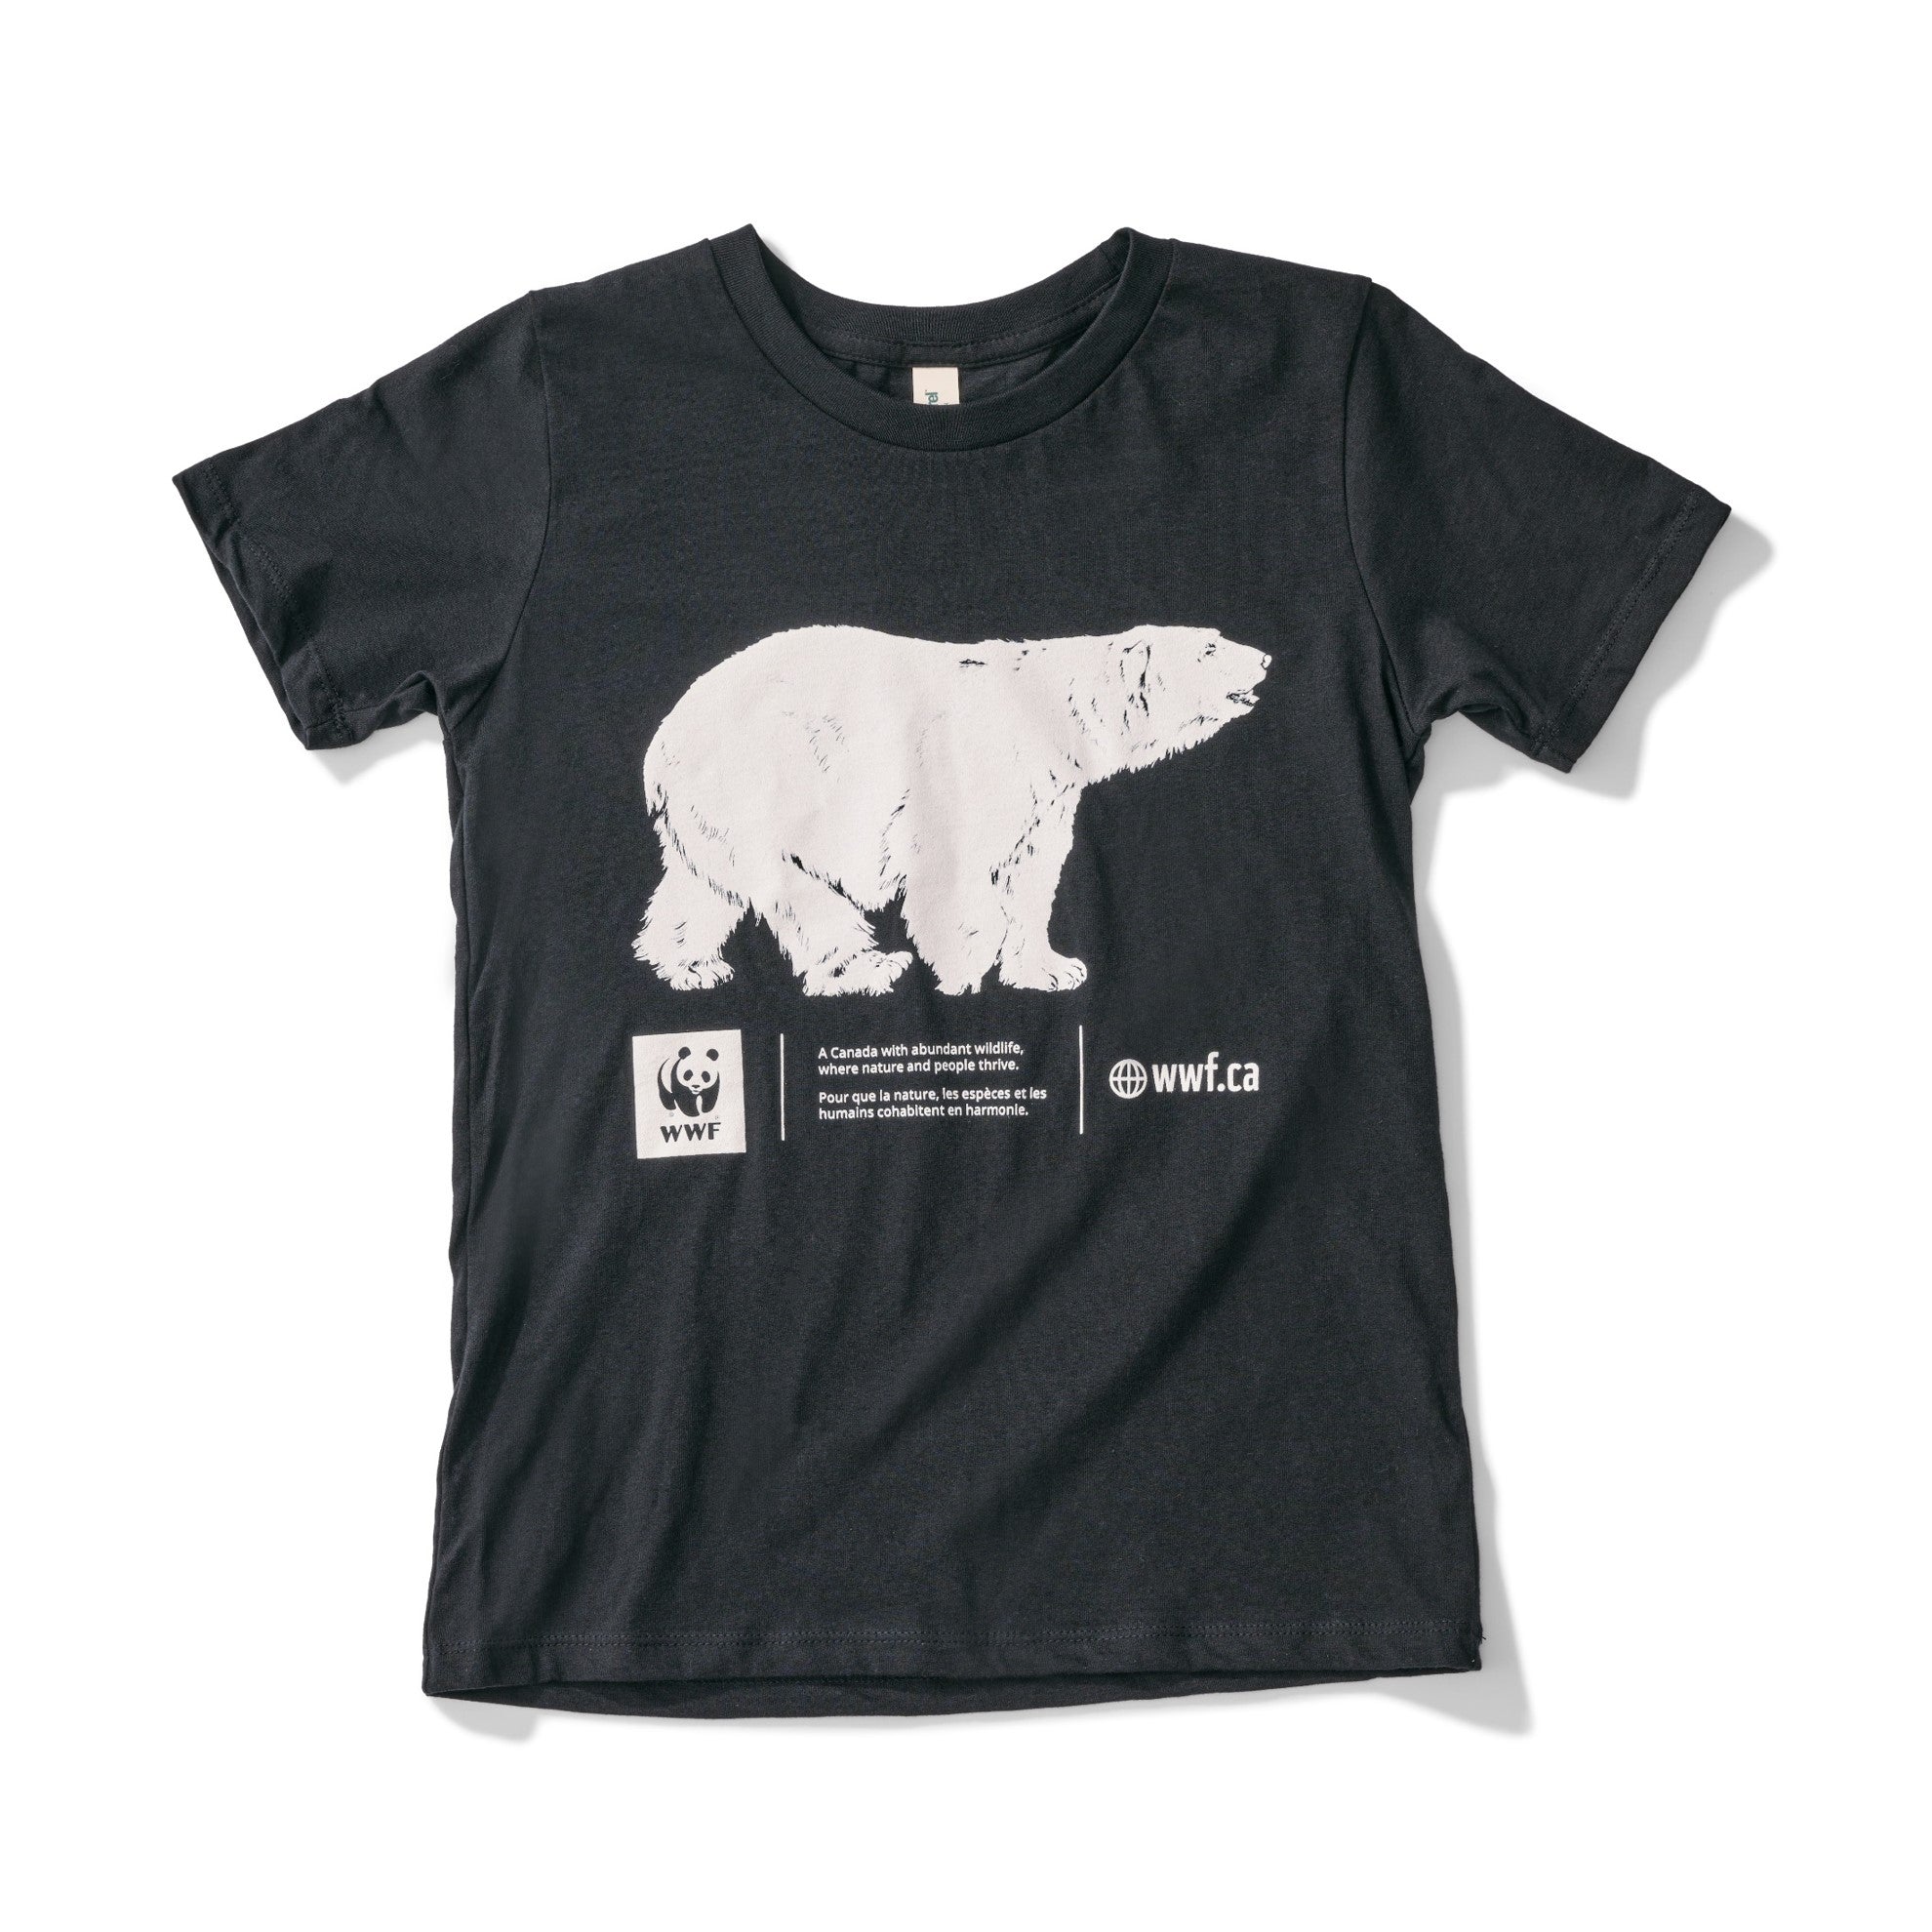 A photo of a black t-shirt with a white polar bear on the chest.